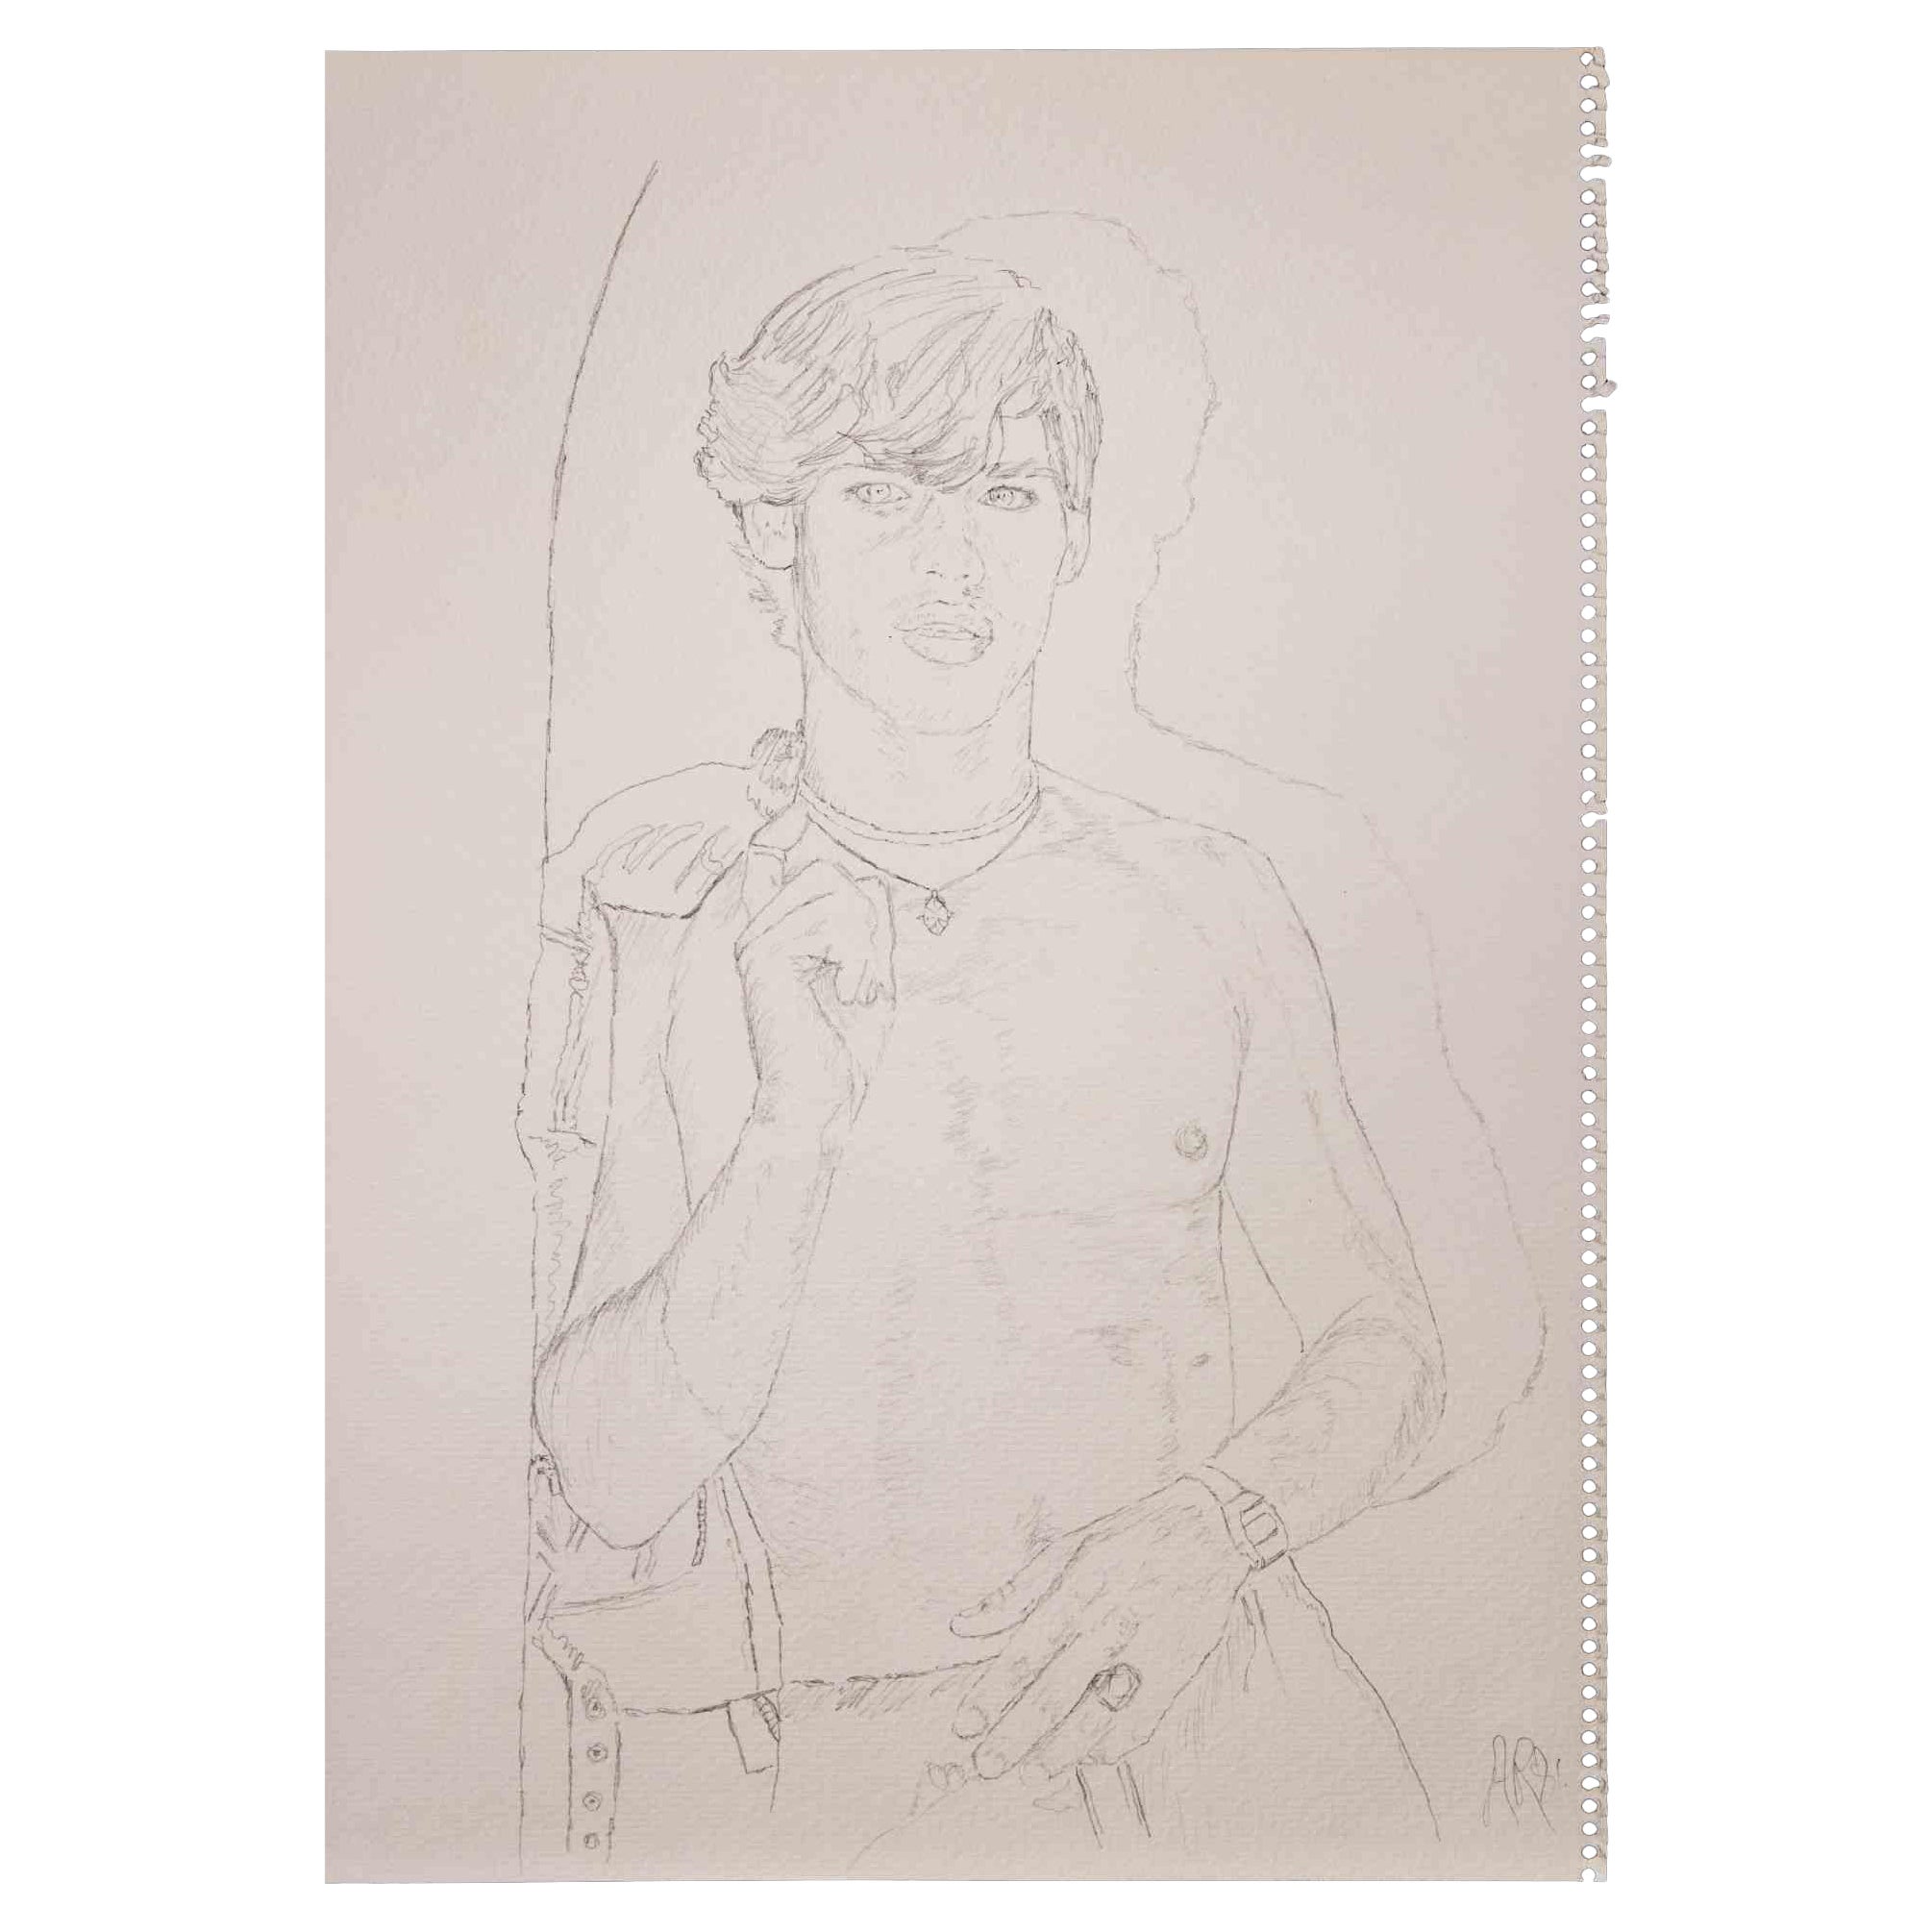 Portrait of a Boy - Pencil Drawing by Anthony Roaland - 1981